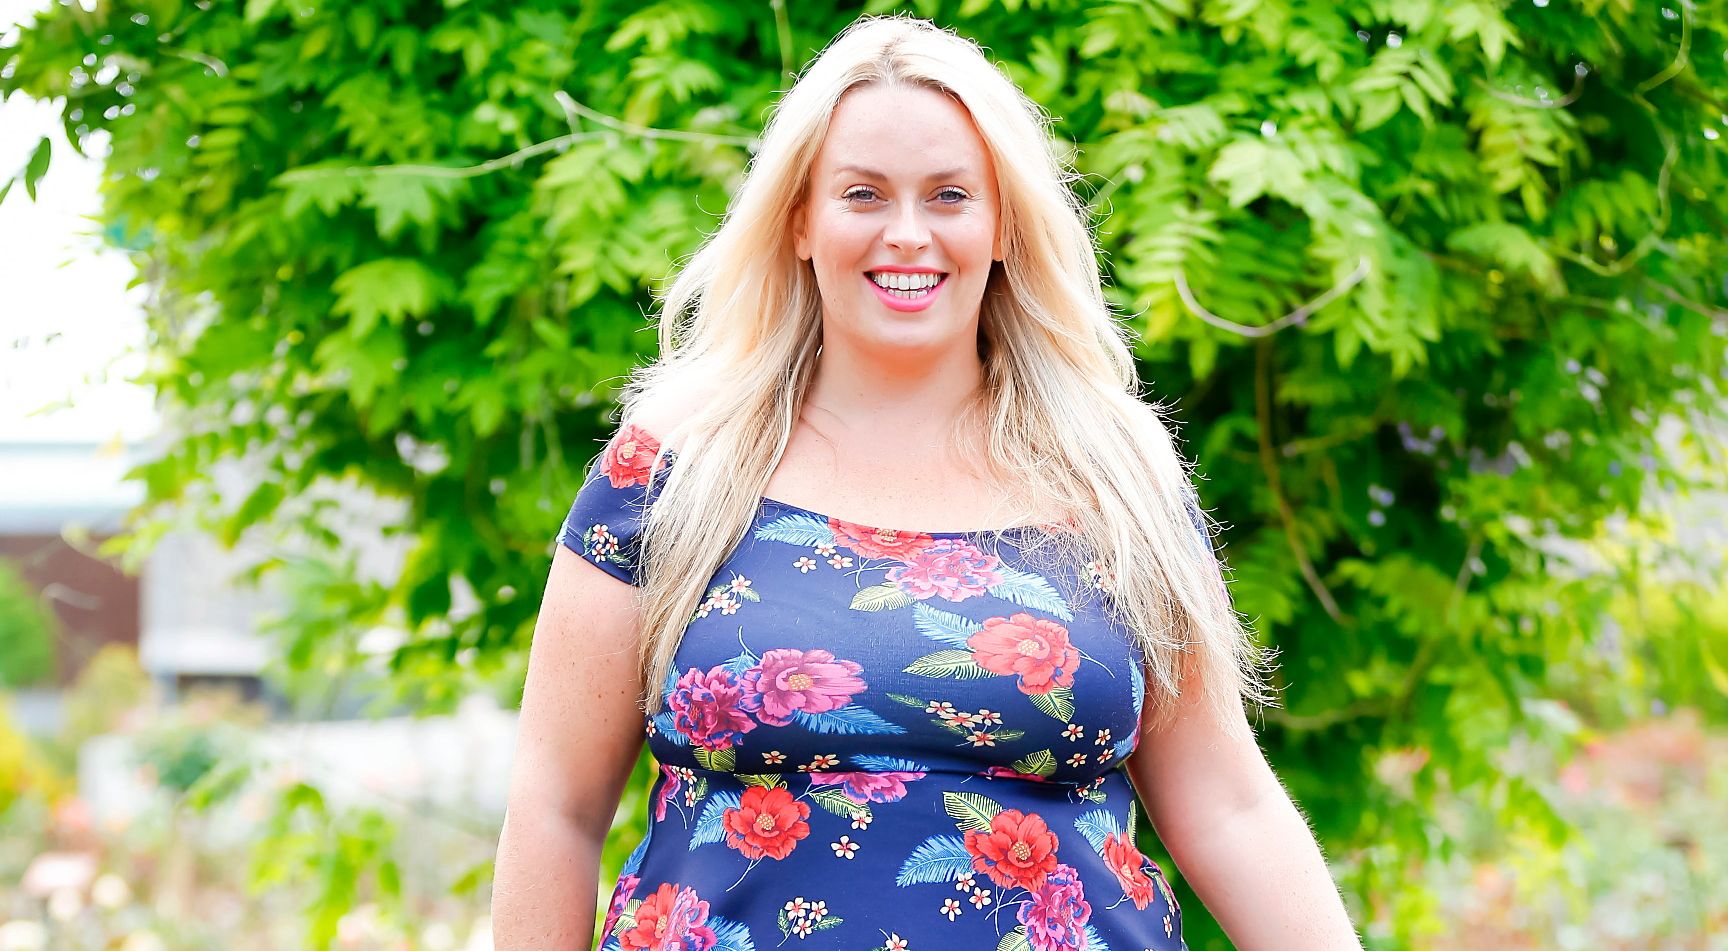 Styrke Indkøbscenter Mastery She used to be bullied about her figure, now plus-size model Charlotte says  every woman should be body confident | BelfastTelegraph.co.uk